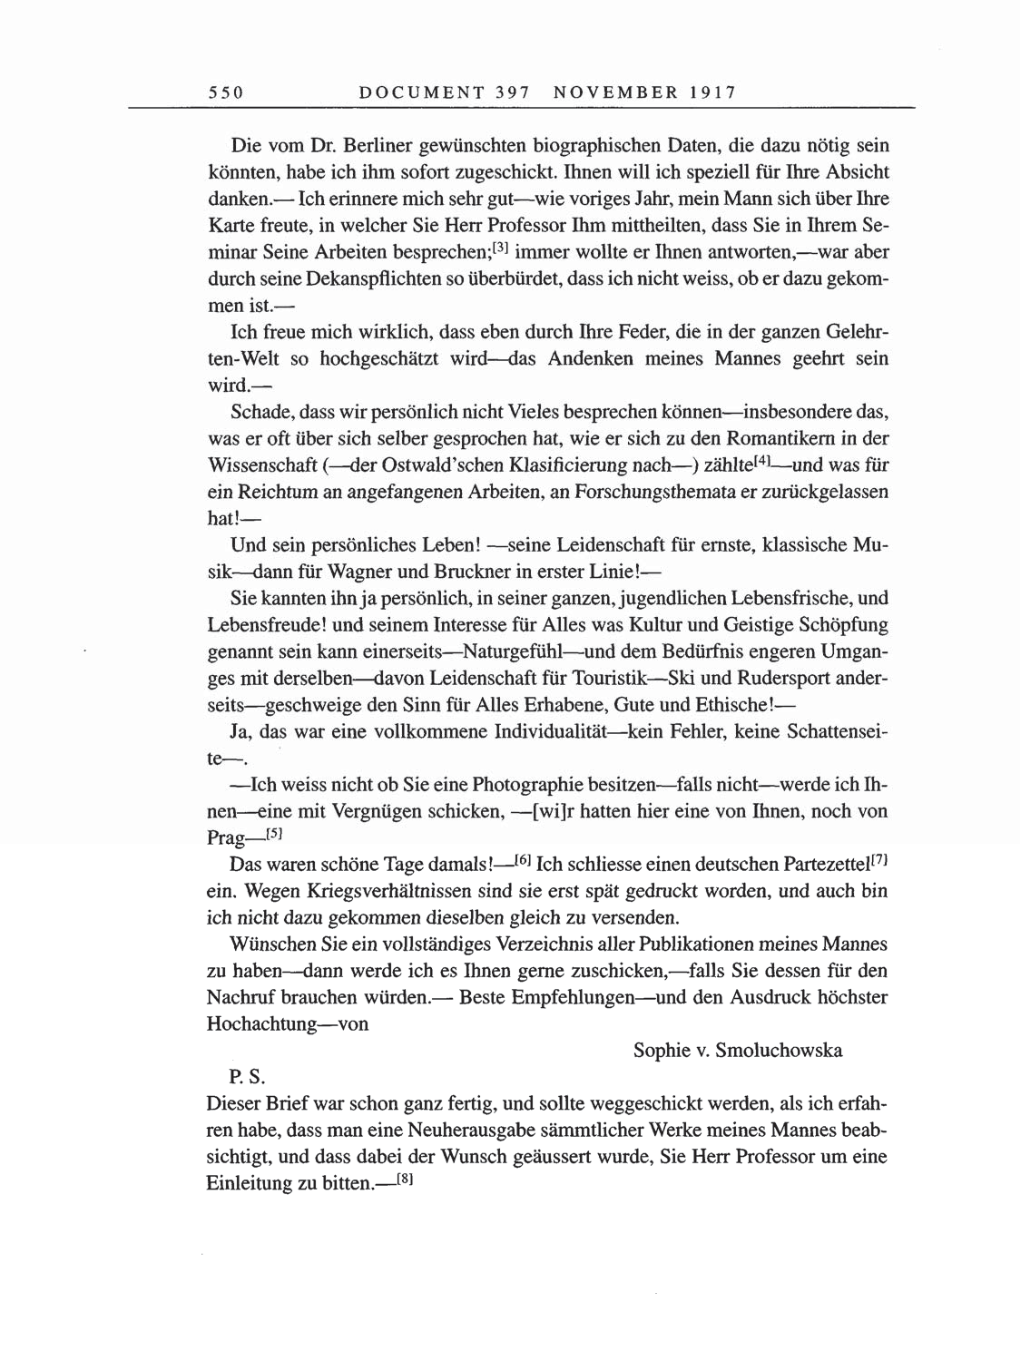 Volume 8, Part A: The Berlin Years: Correspondence 1914-1917 page 550